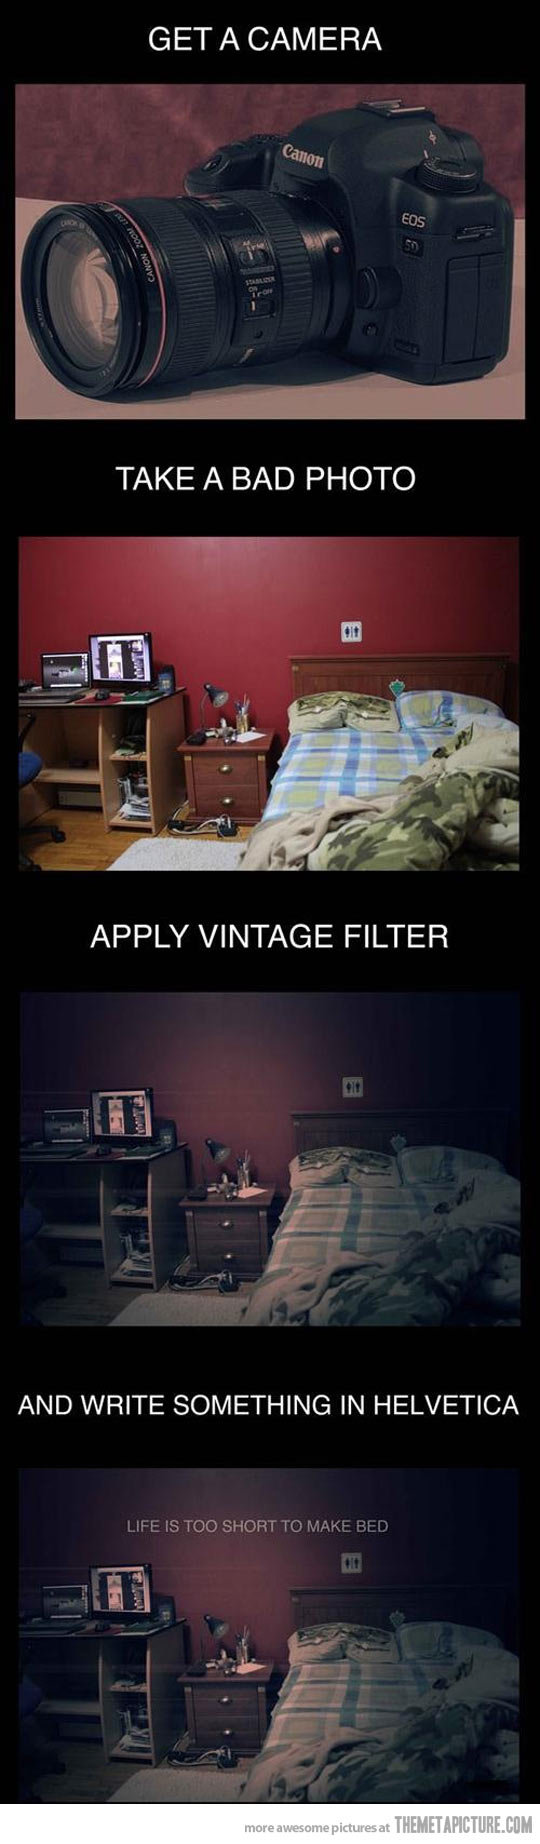 How to: Hipster. . GETA CAMERA TAKE A BAD PHOTO APPLY VINTAGE FILTER AND WHITE SOMETHING IN HELVETICA. Bed is not too short for Ed though.